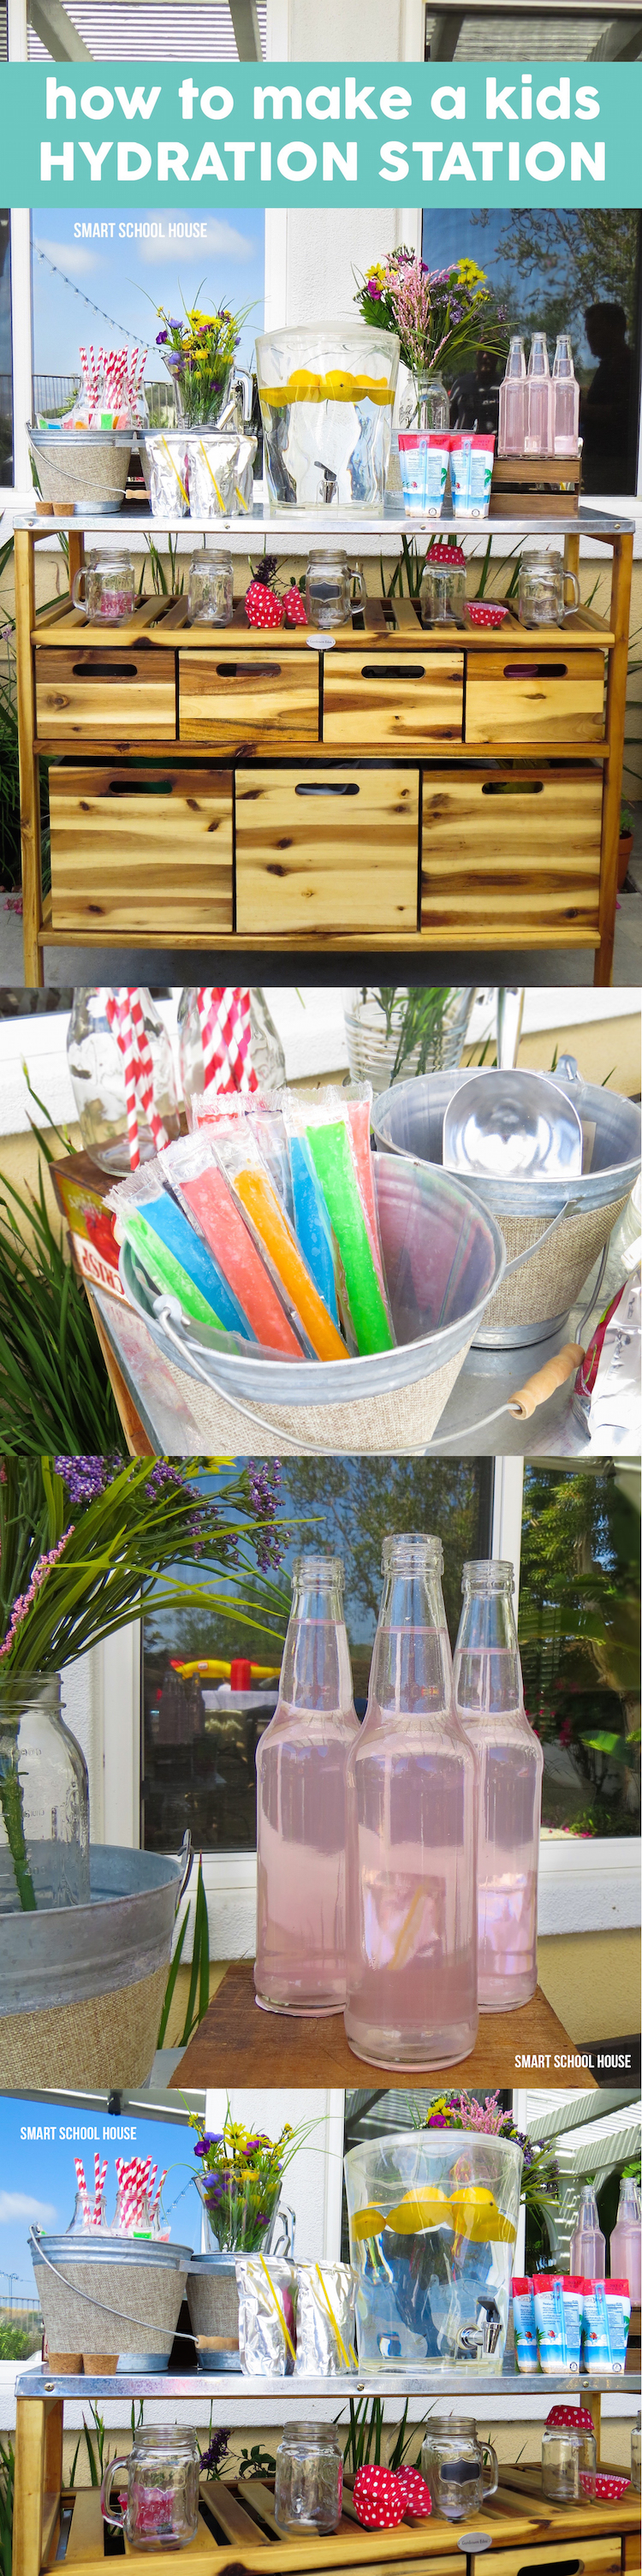 Hydration Station for Kids. A fun, creative, diy idea for keeping kids hydrated while they play all day!